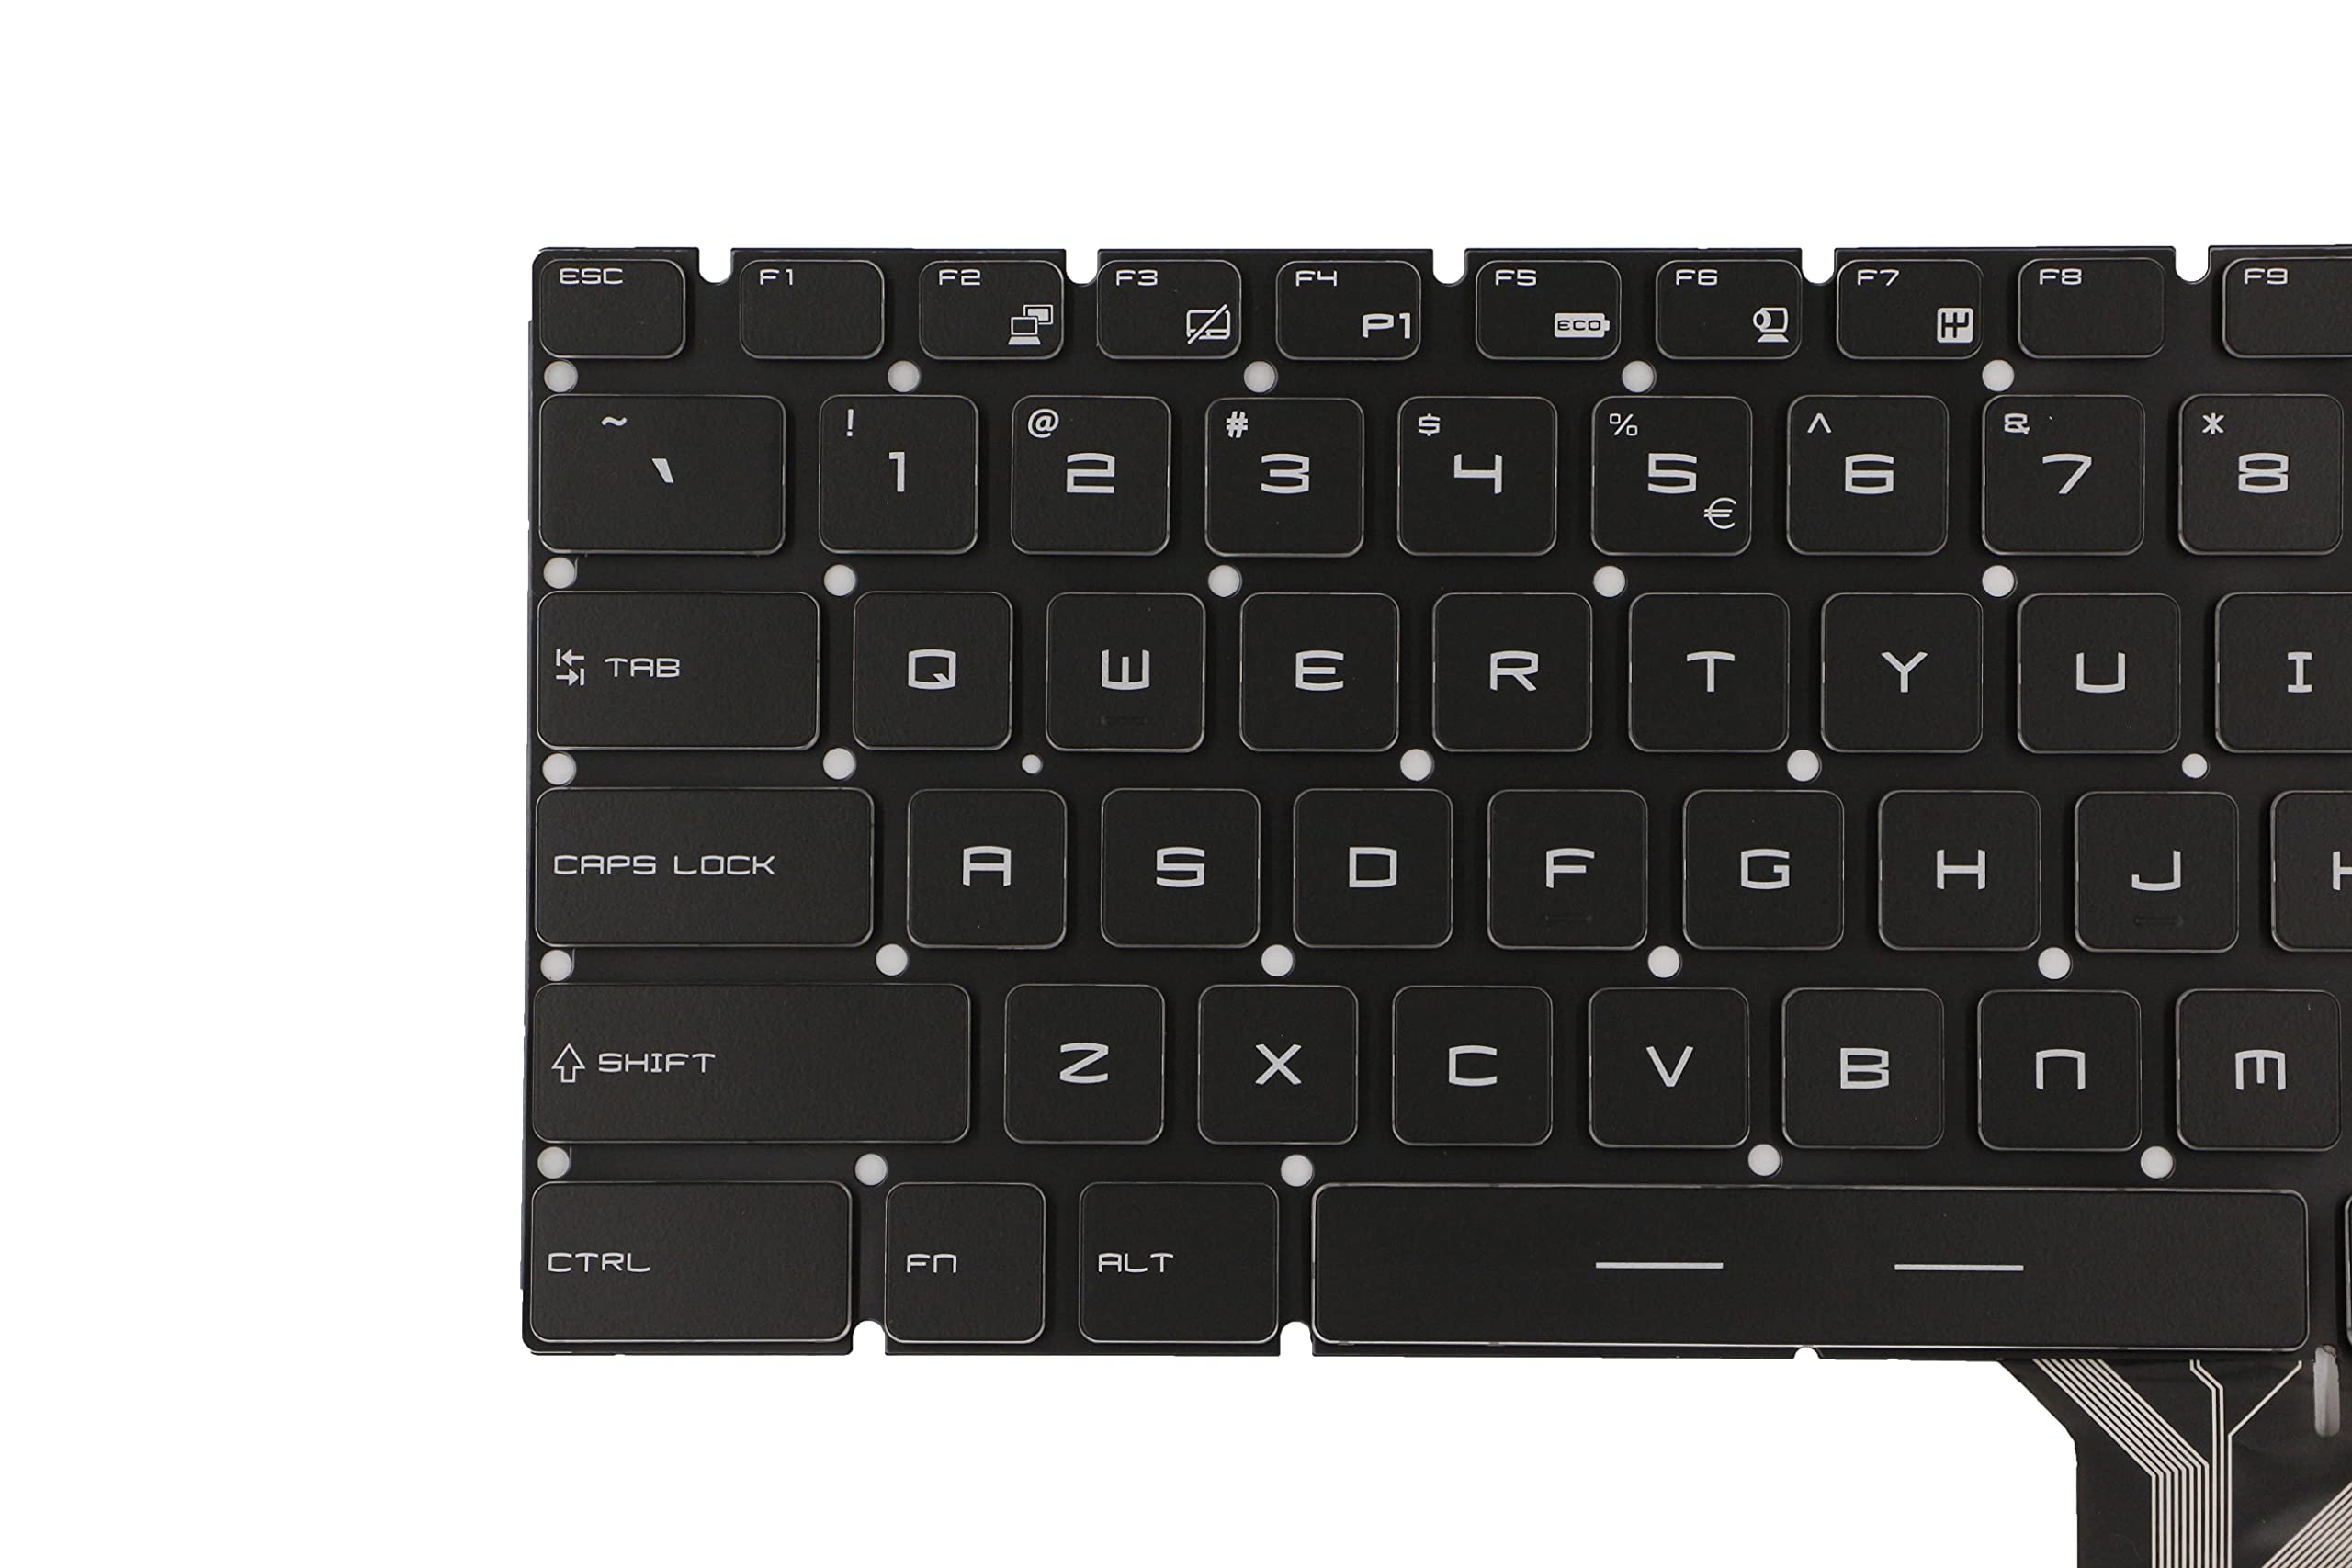 Replacement Keyboard for MSI GS75 GE75 GF75 GE72 GP75 GT72 GE72VR GL75 GL72 GP62 GL72 GL65 GL62 GL62M GL63 GS63 GS63VR GE63 GE62 Series Laptop with Backlit US Layout